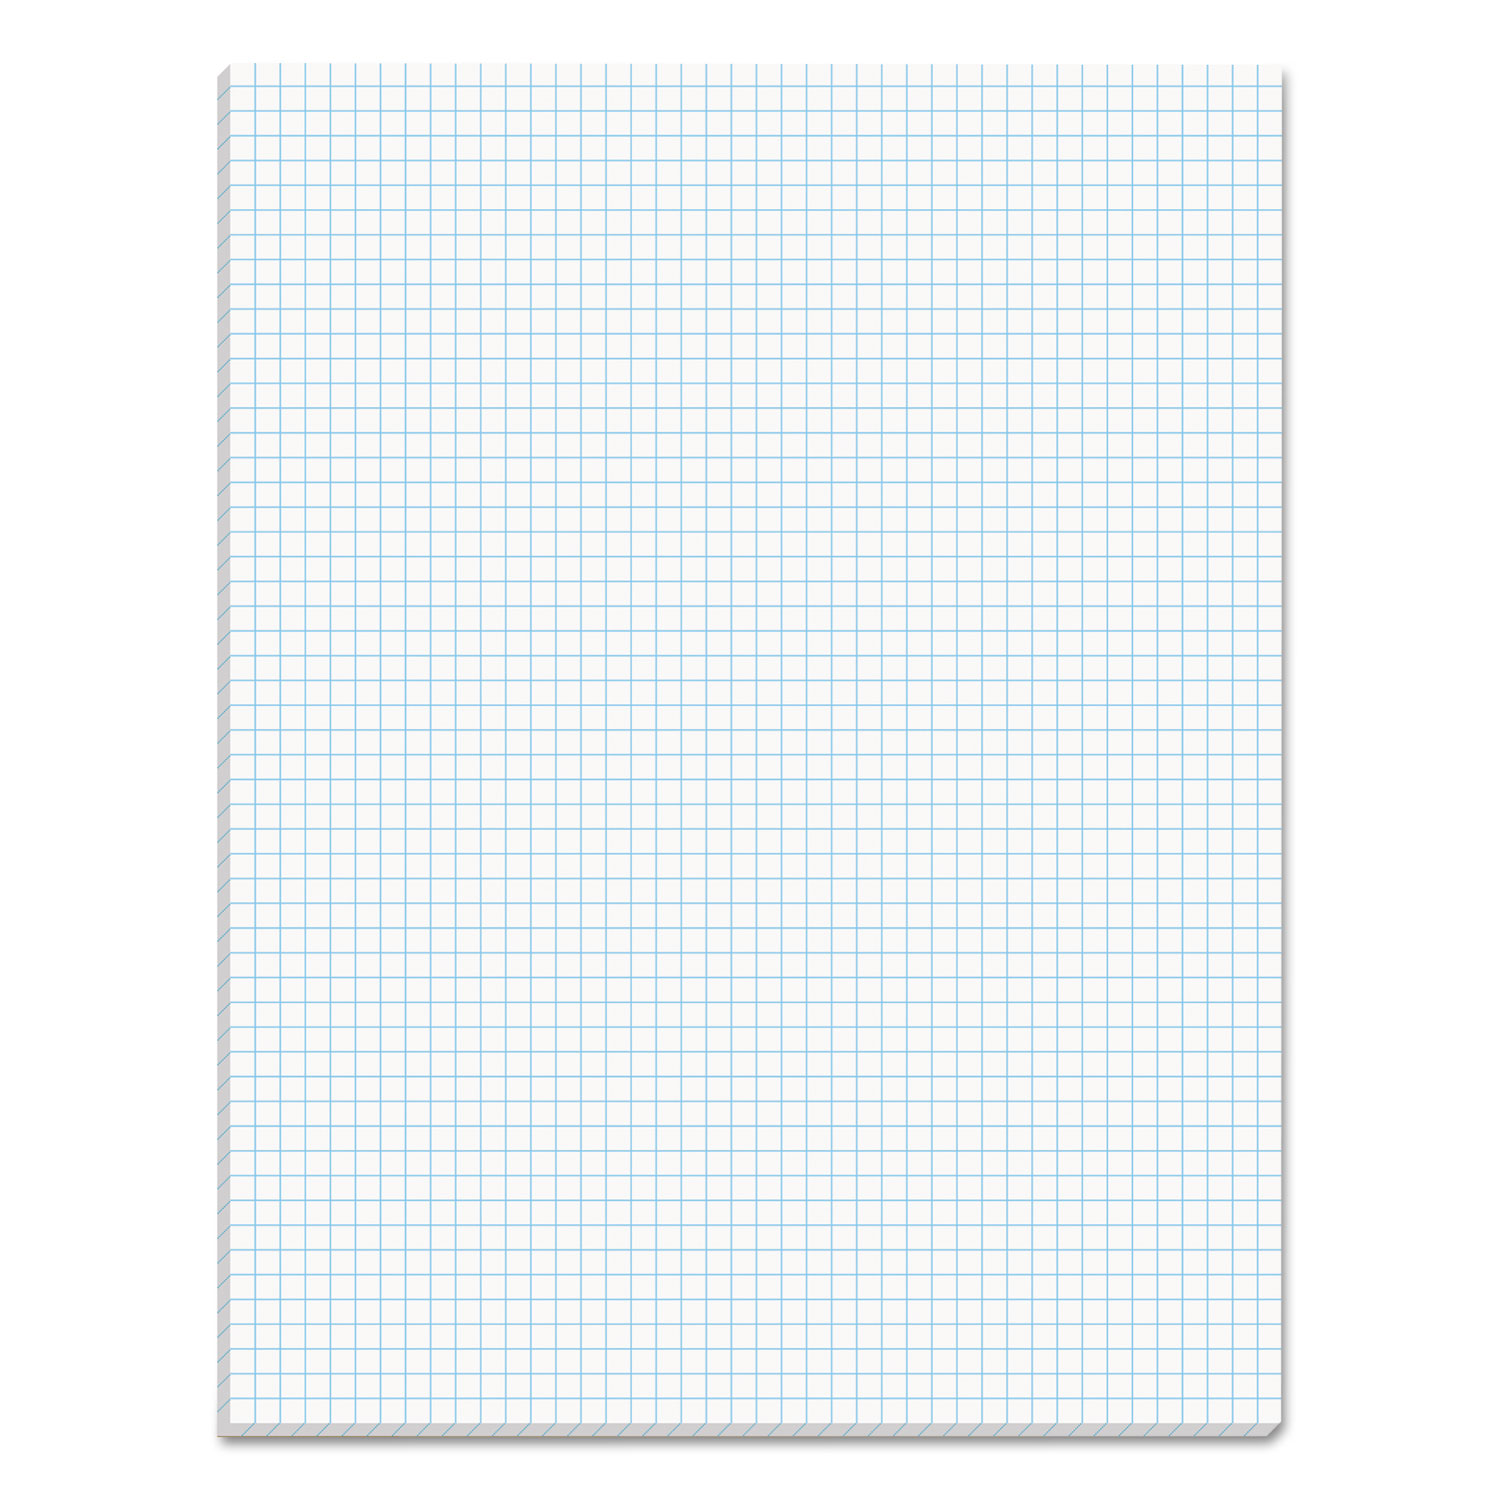  TOPS 33051 Quadrille Pads, 5 sq/in Quadrille Rule, 8.5 x 11, White, 50 Sheets (TOP33051) 